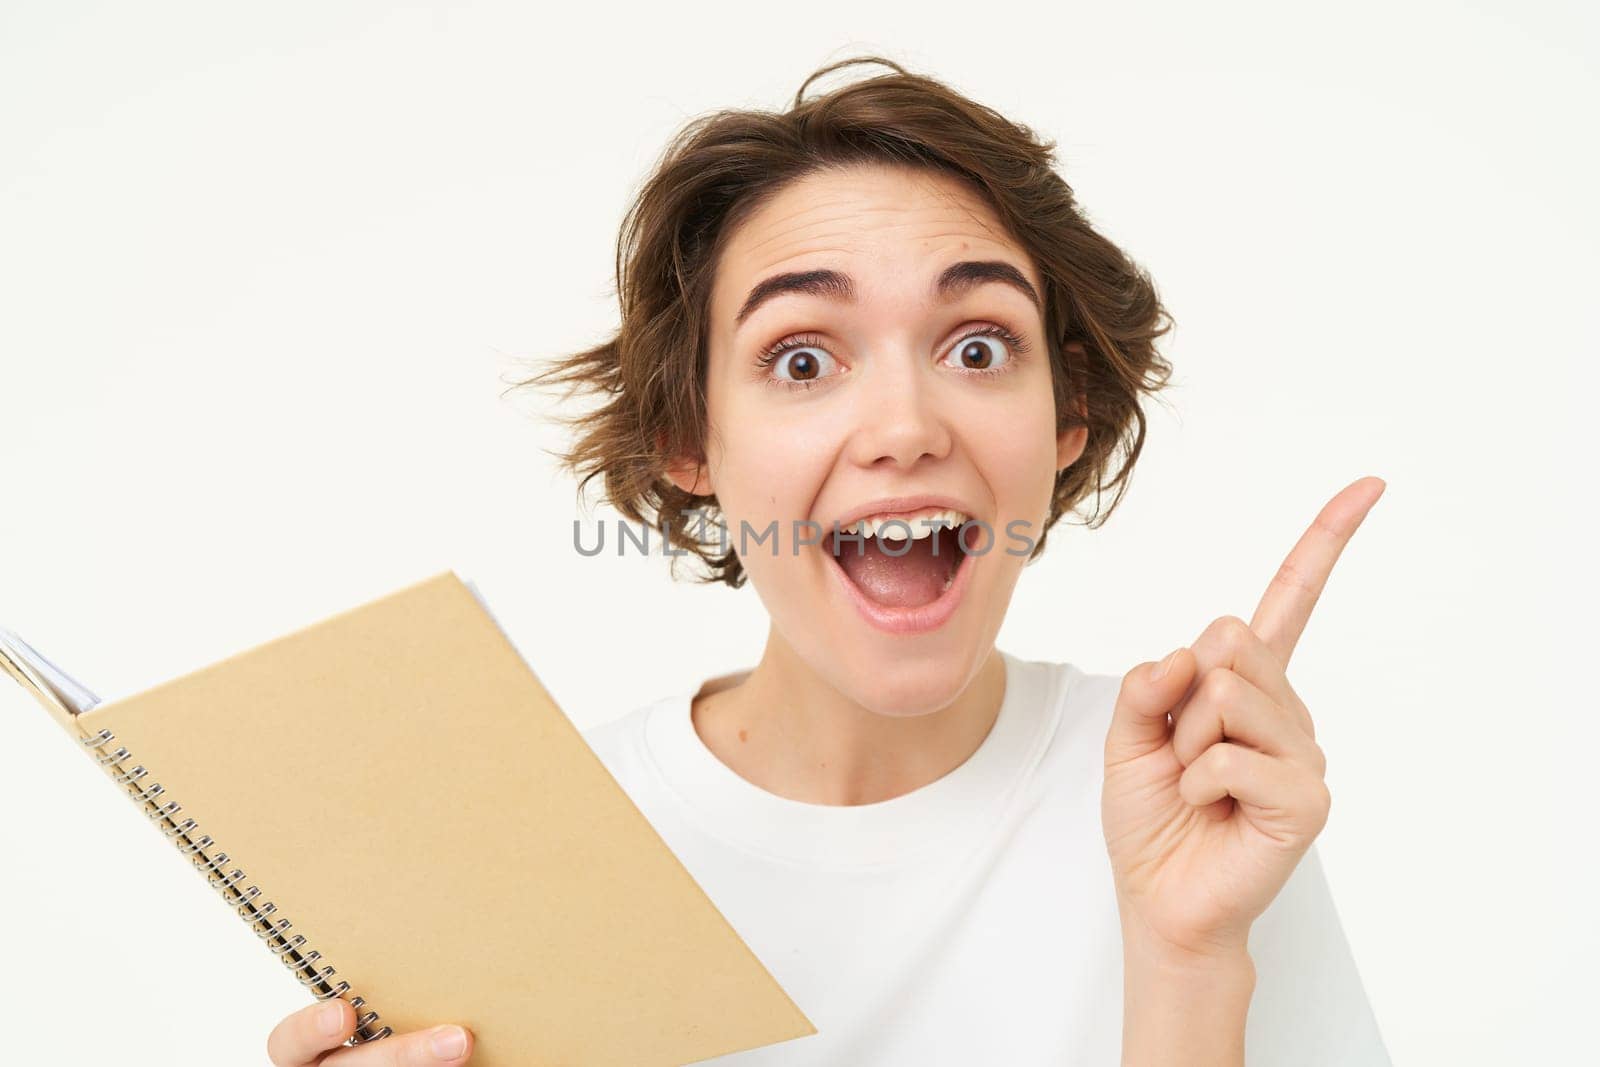 Enthusiastic brunette woman with diary, holding planner book, pointing at upper right corner and smiling with excitement, standing over white background.